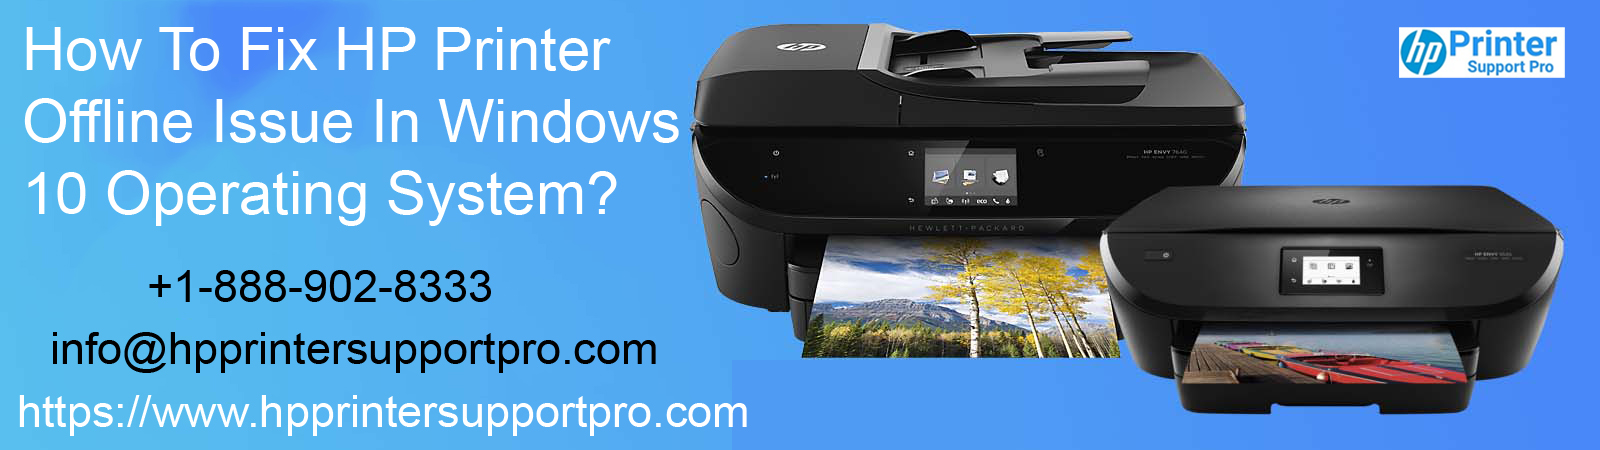 How To Fix HP Printer Offline Issue In Windows 10 Operating System